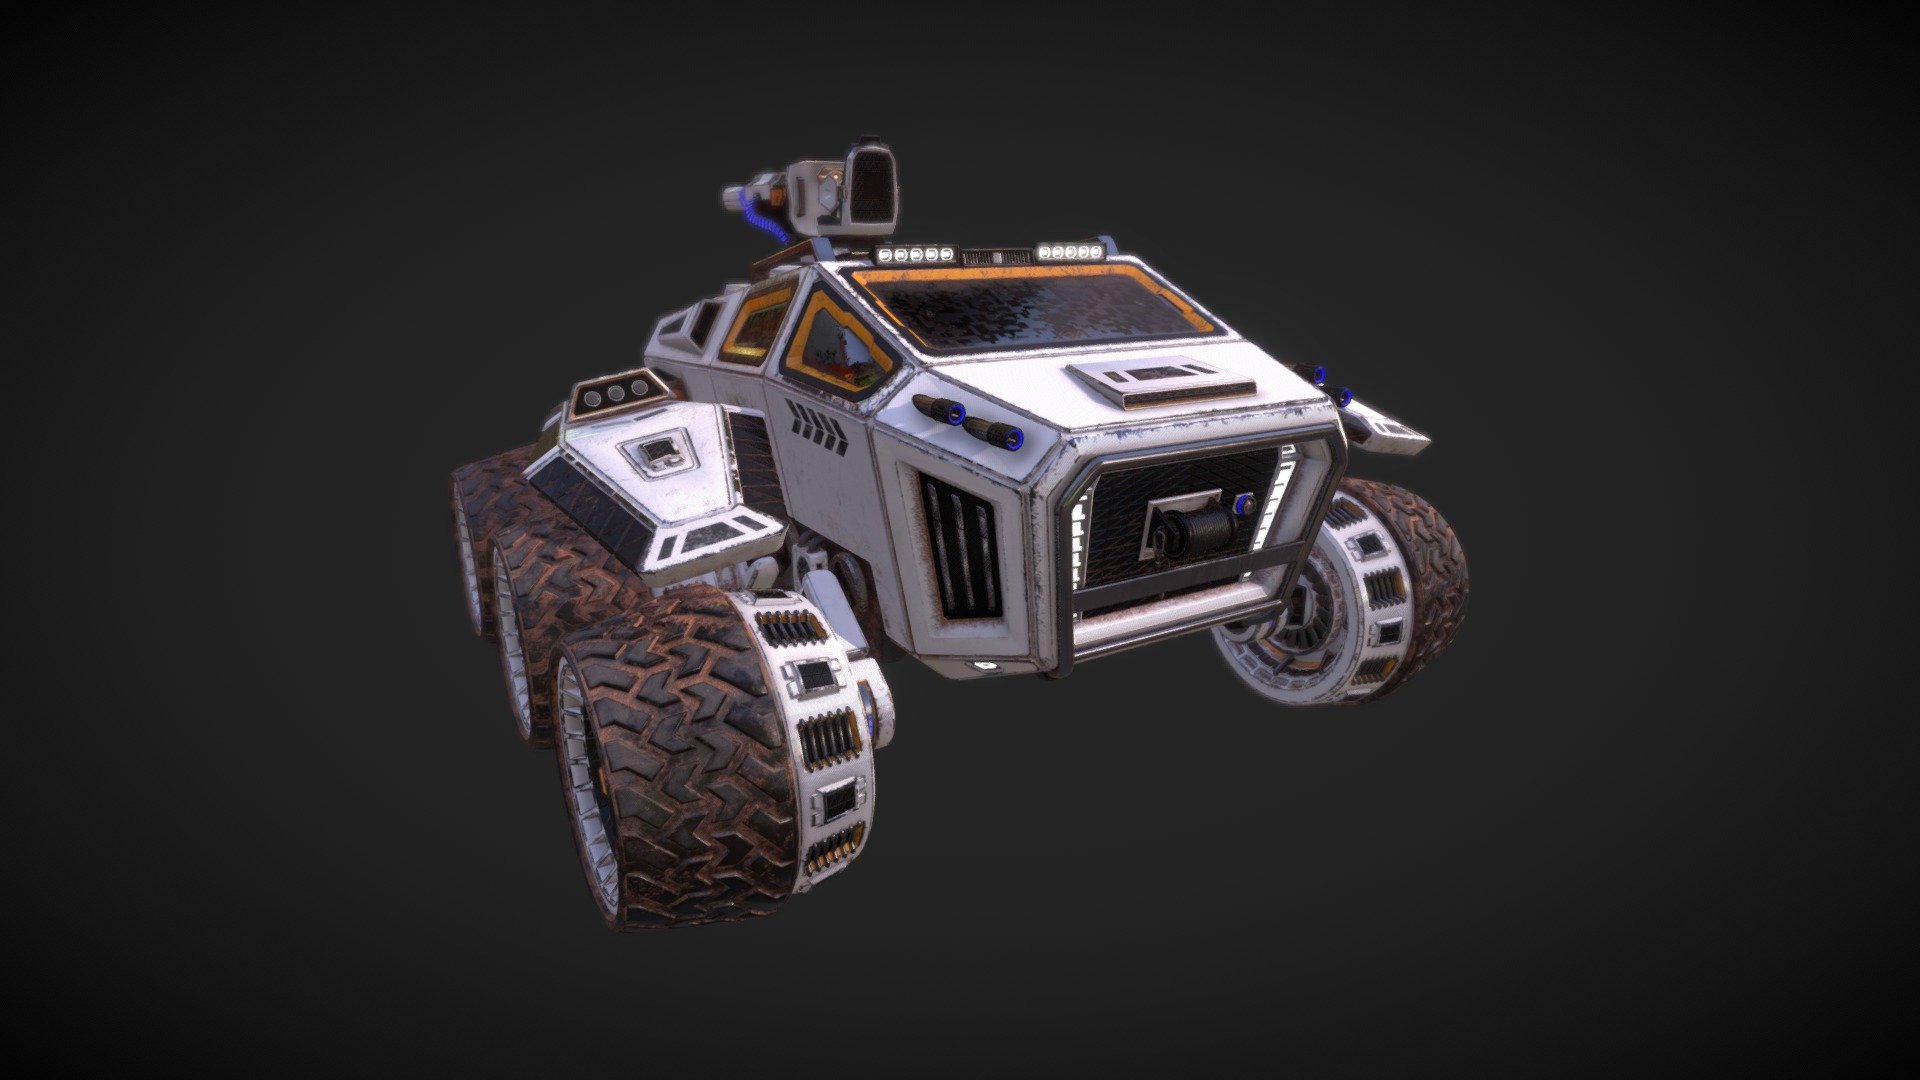 Military and research rover for planetary exploration. Modeled in 3DS Max, baked and textured in Substance Painter 3d model